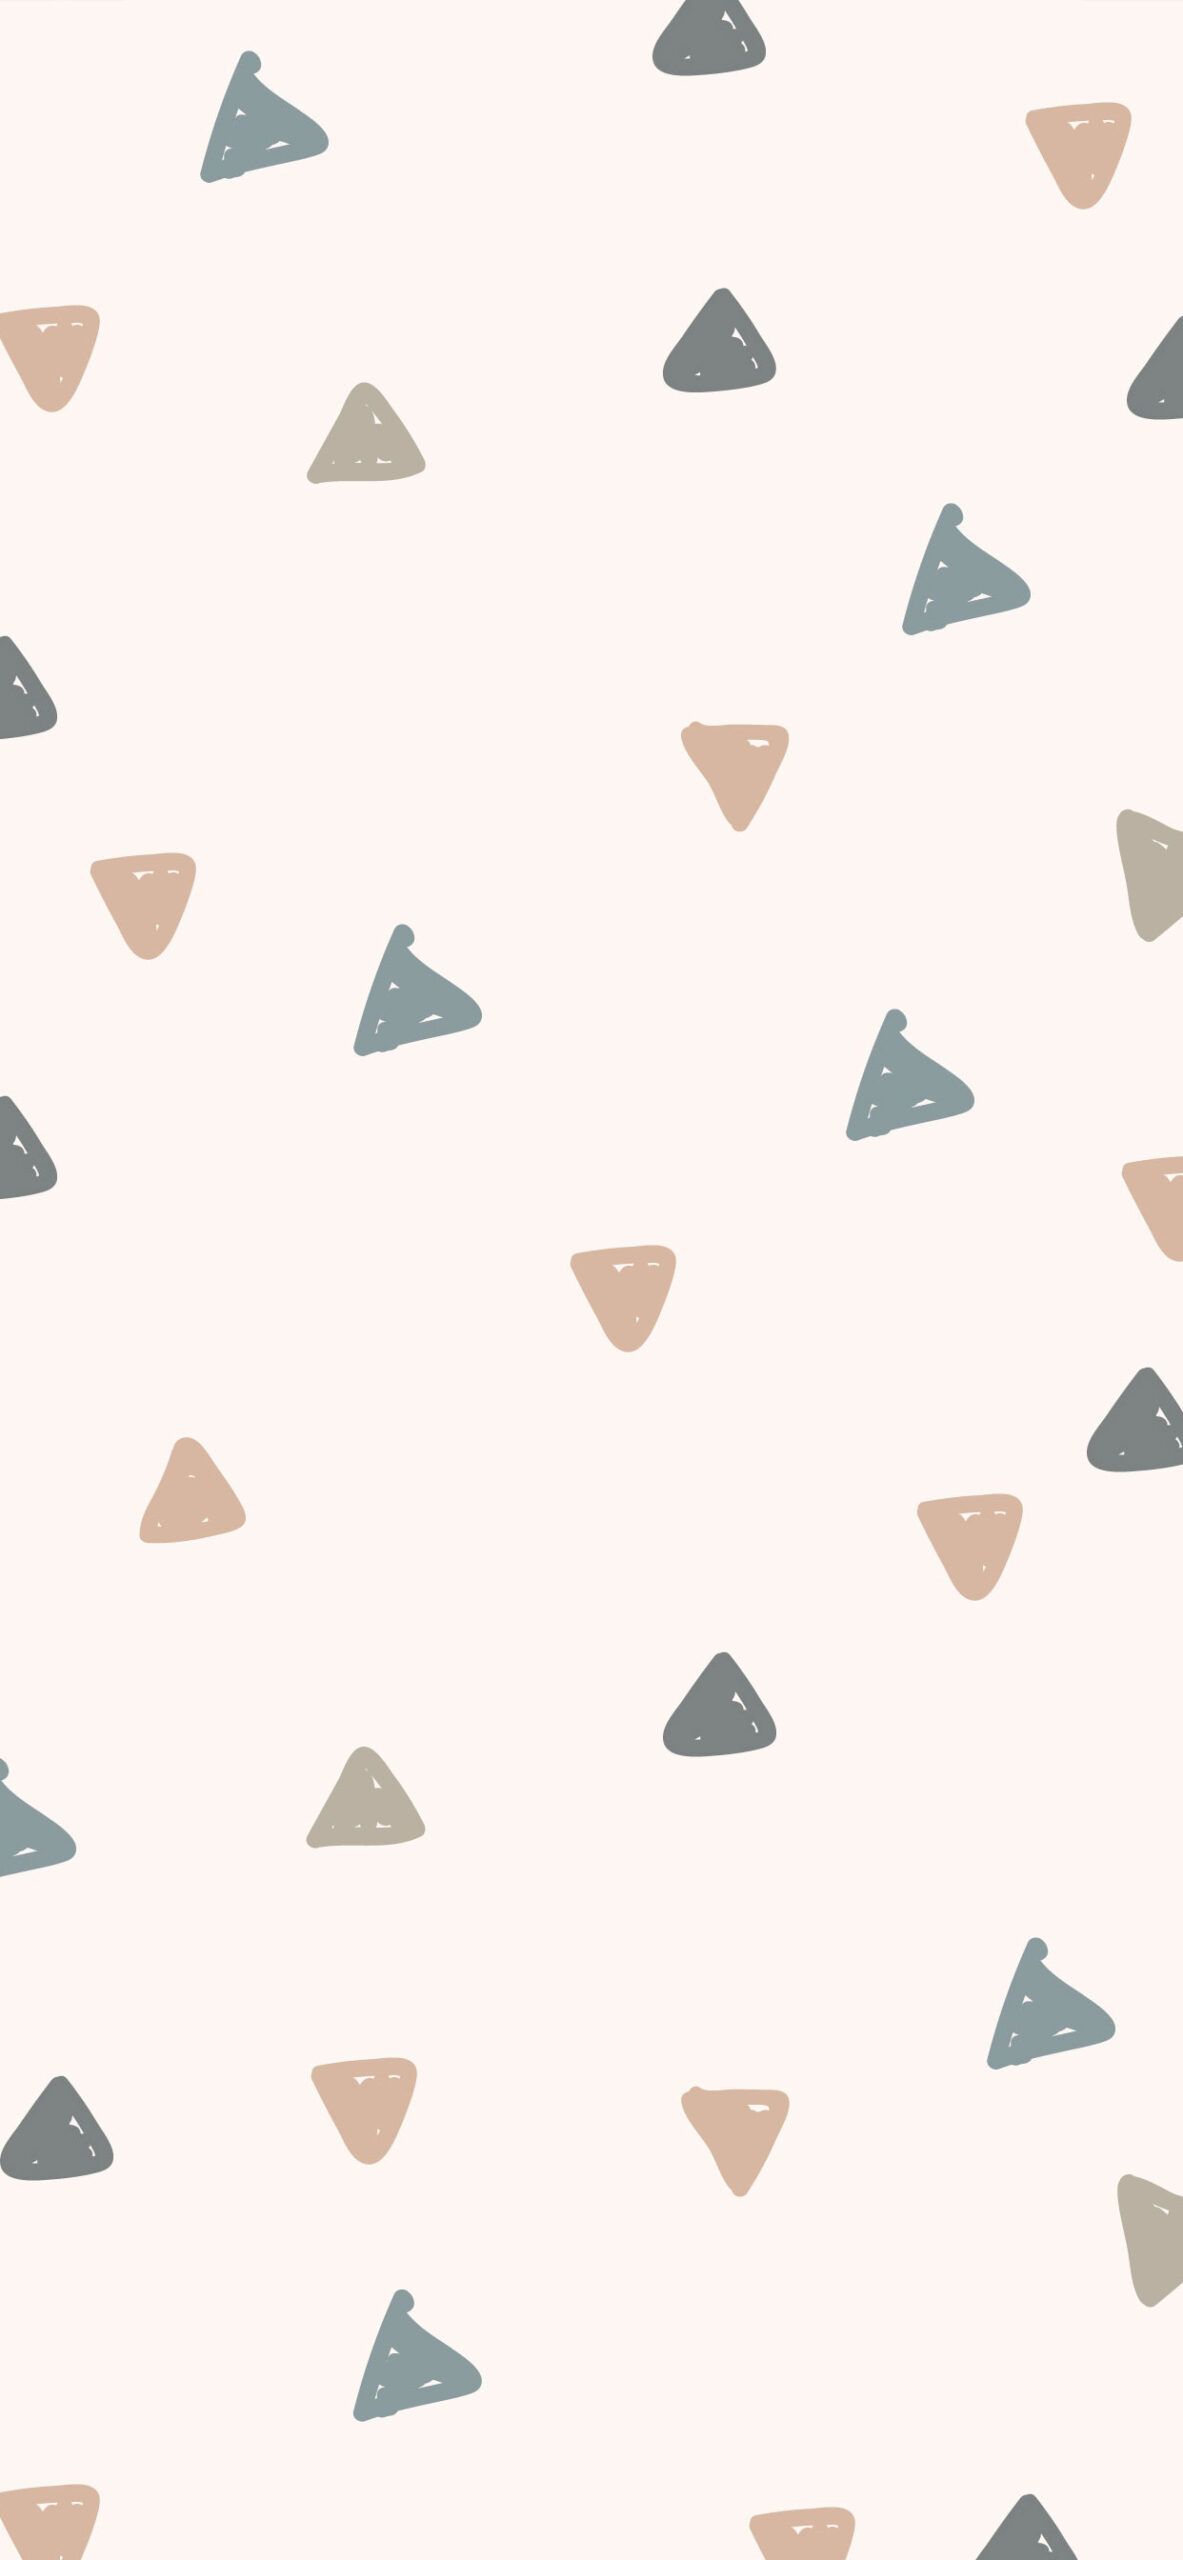 A phone wallpaper with a pattern of pastel colored triangles on a white background - Boho